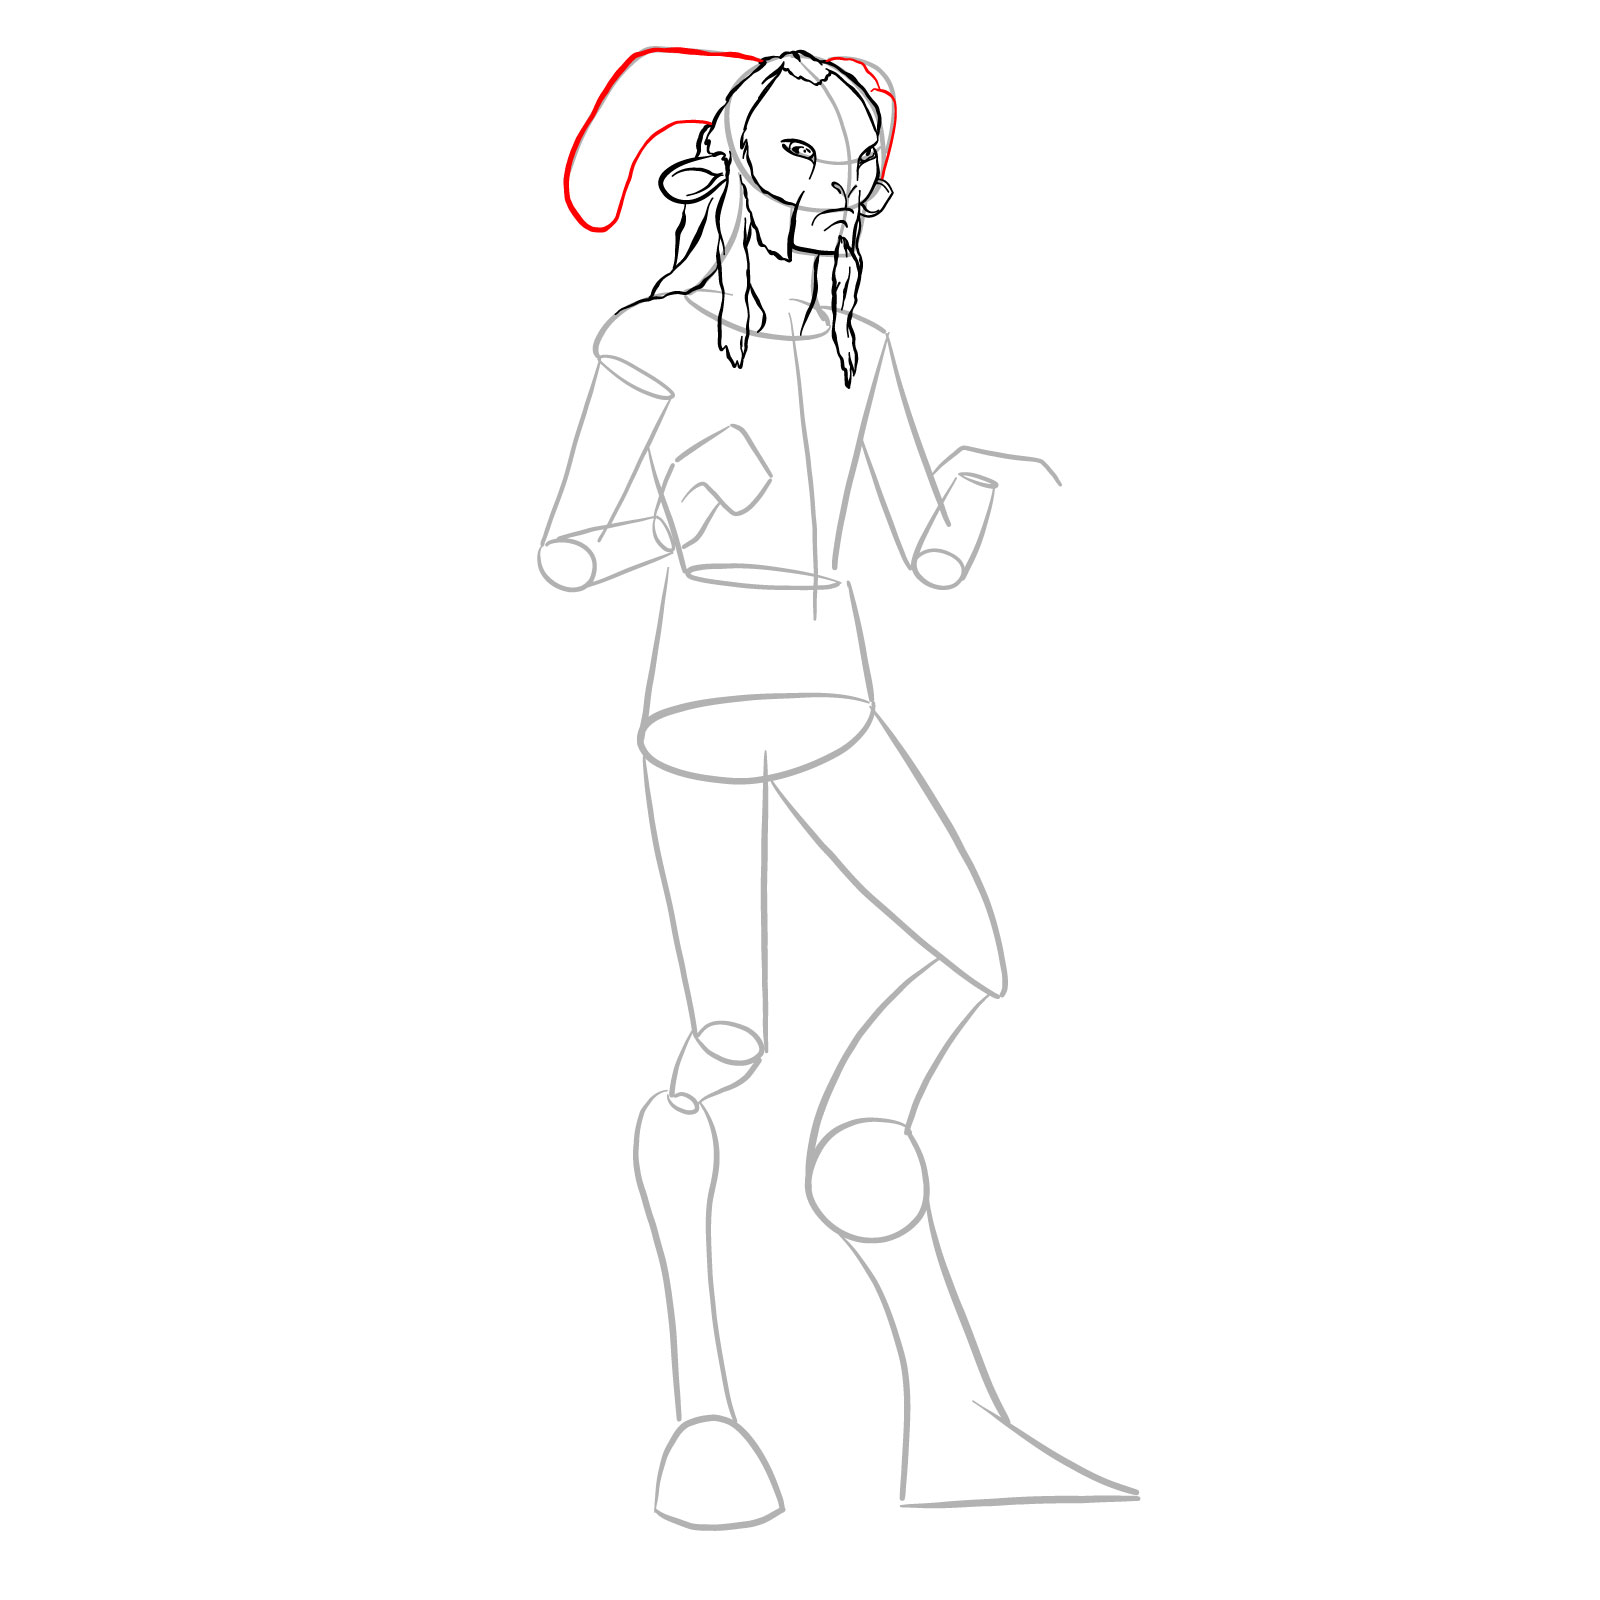 How to draw a Faun - step 13